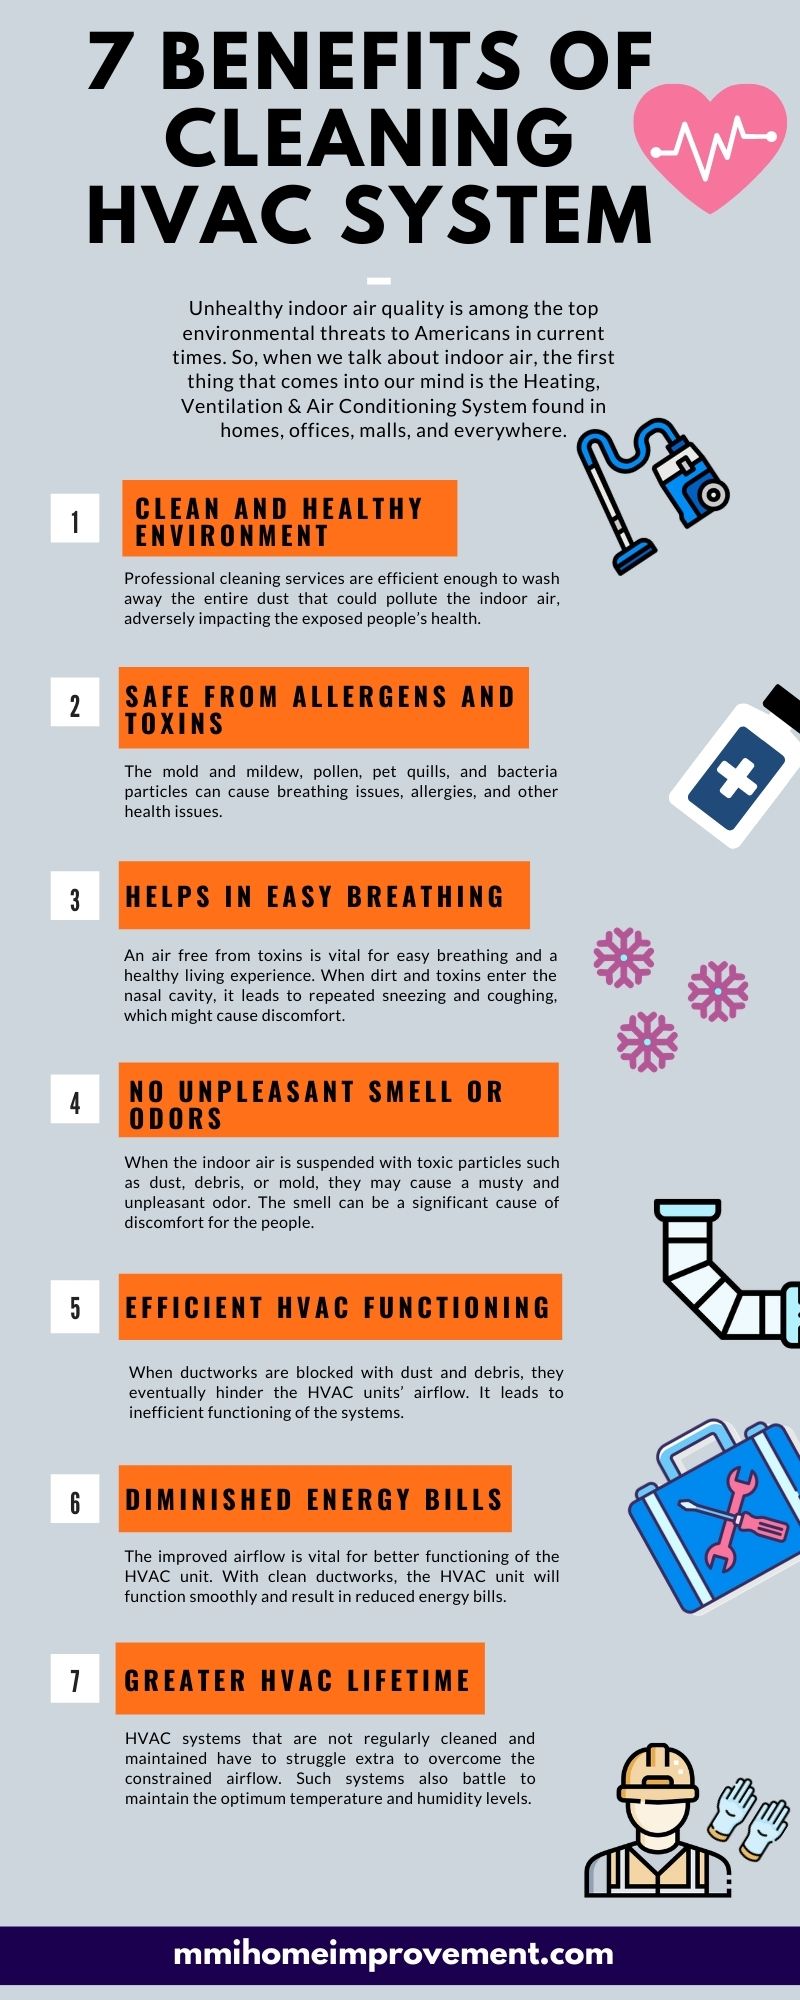 7 Benefits of Cleaning HVAC System - Infograhic